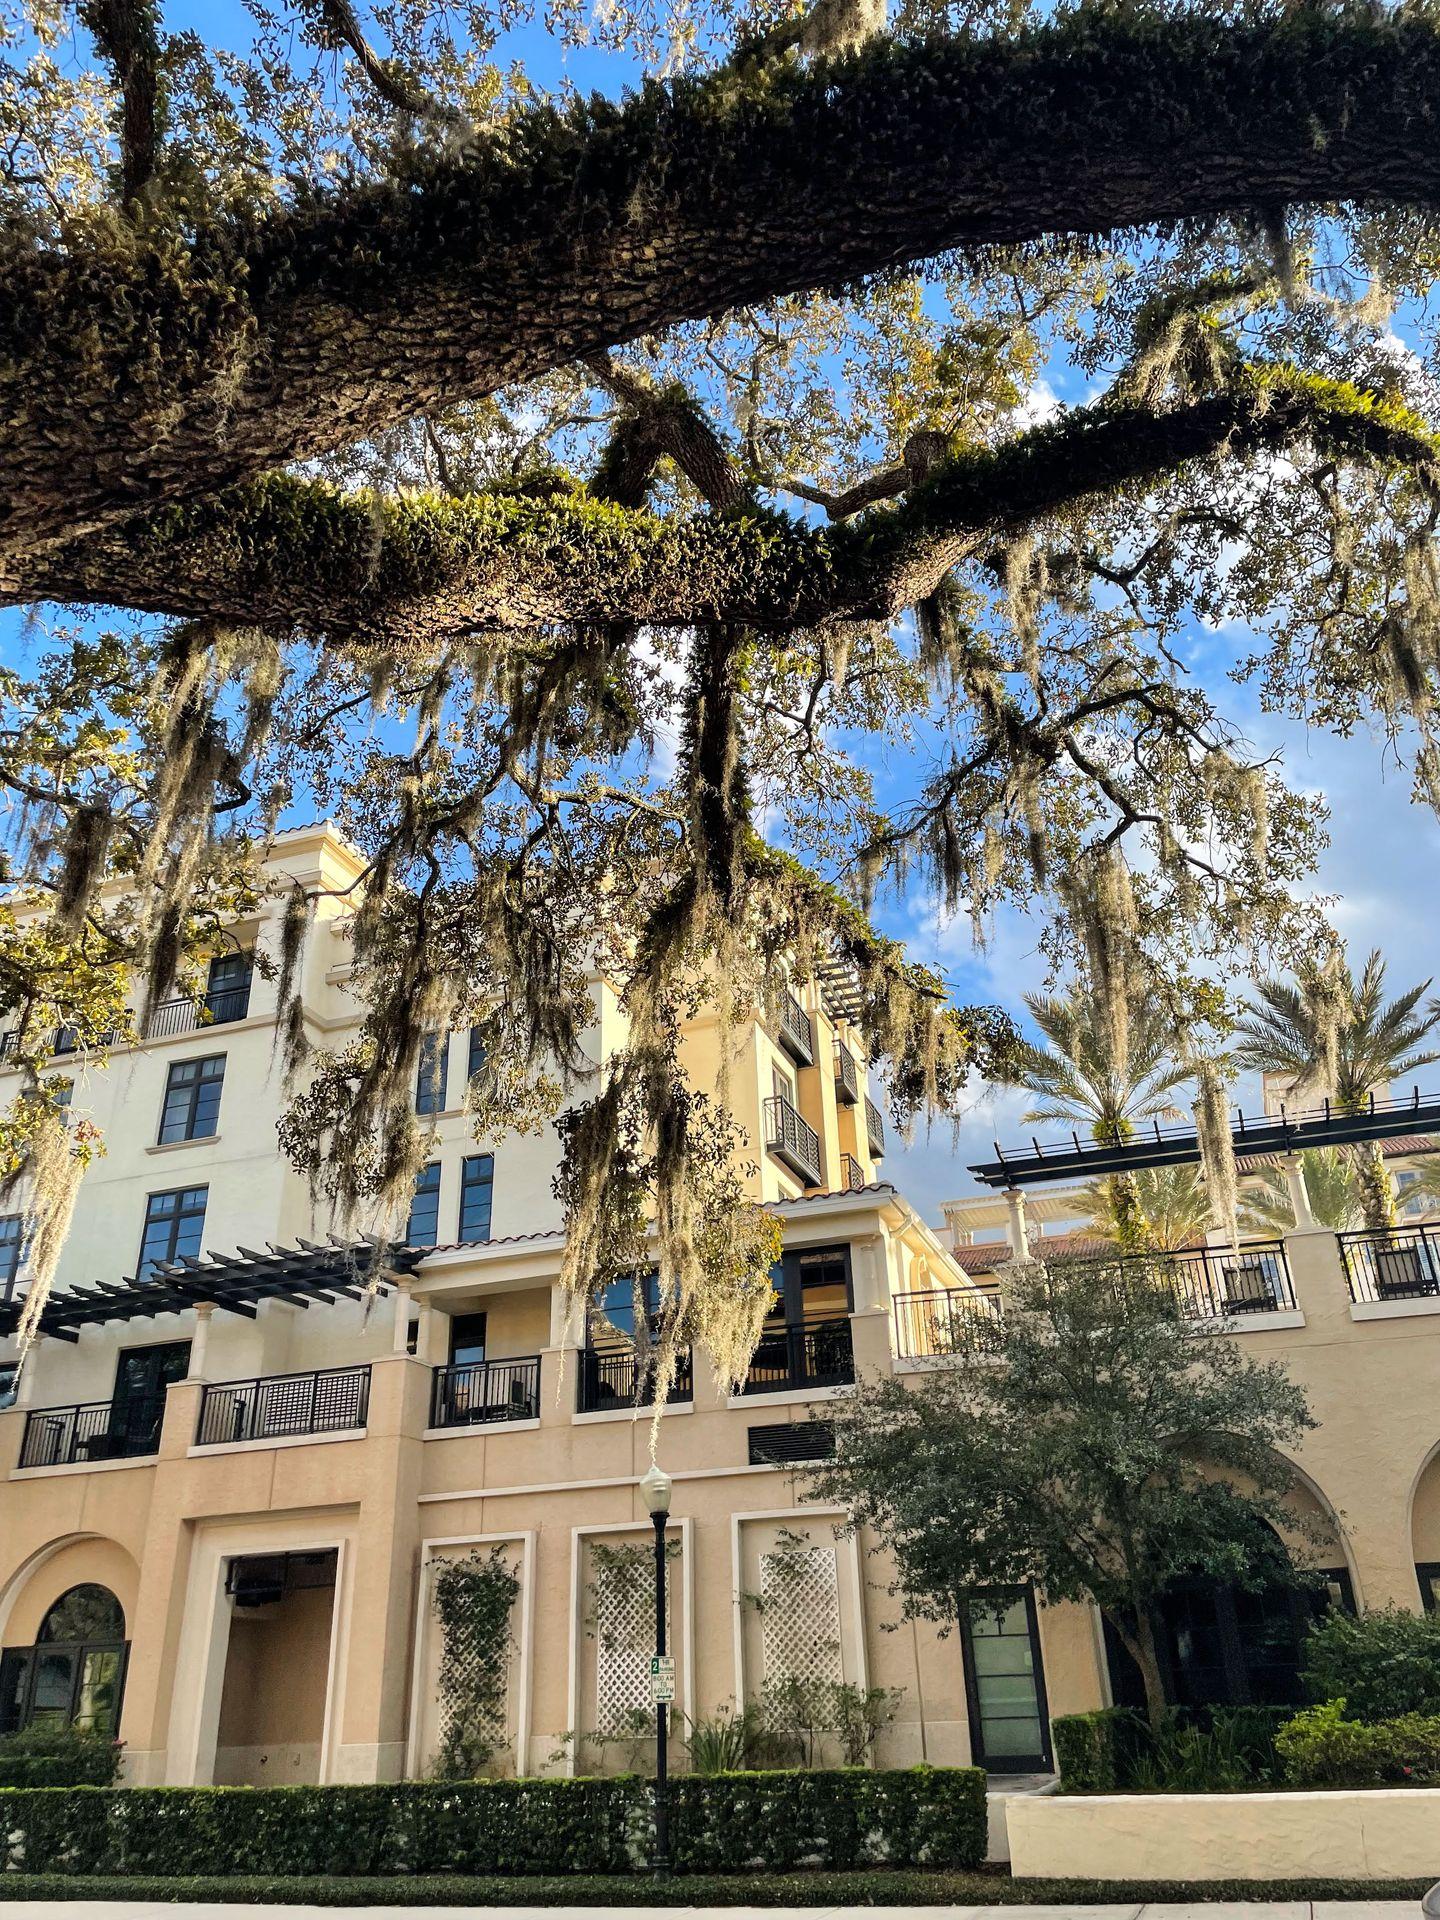 A cream building behind a tree hanging with spanish moss.